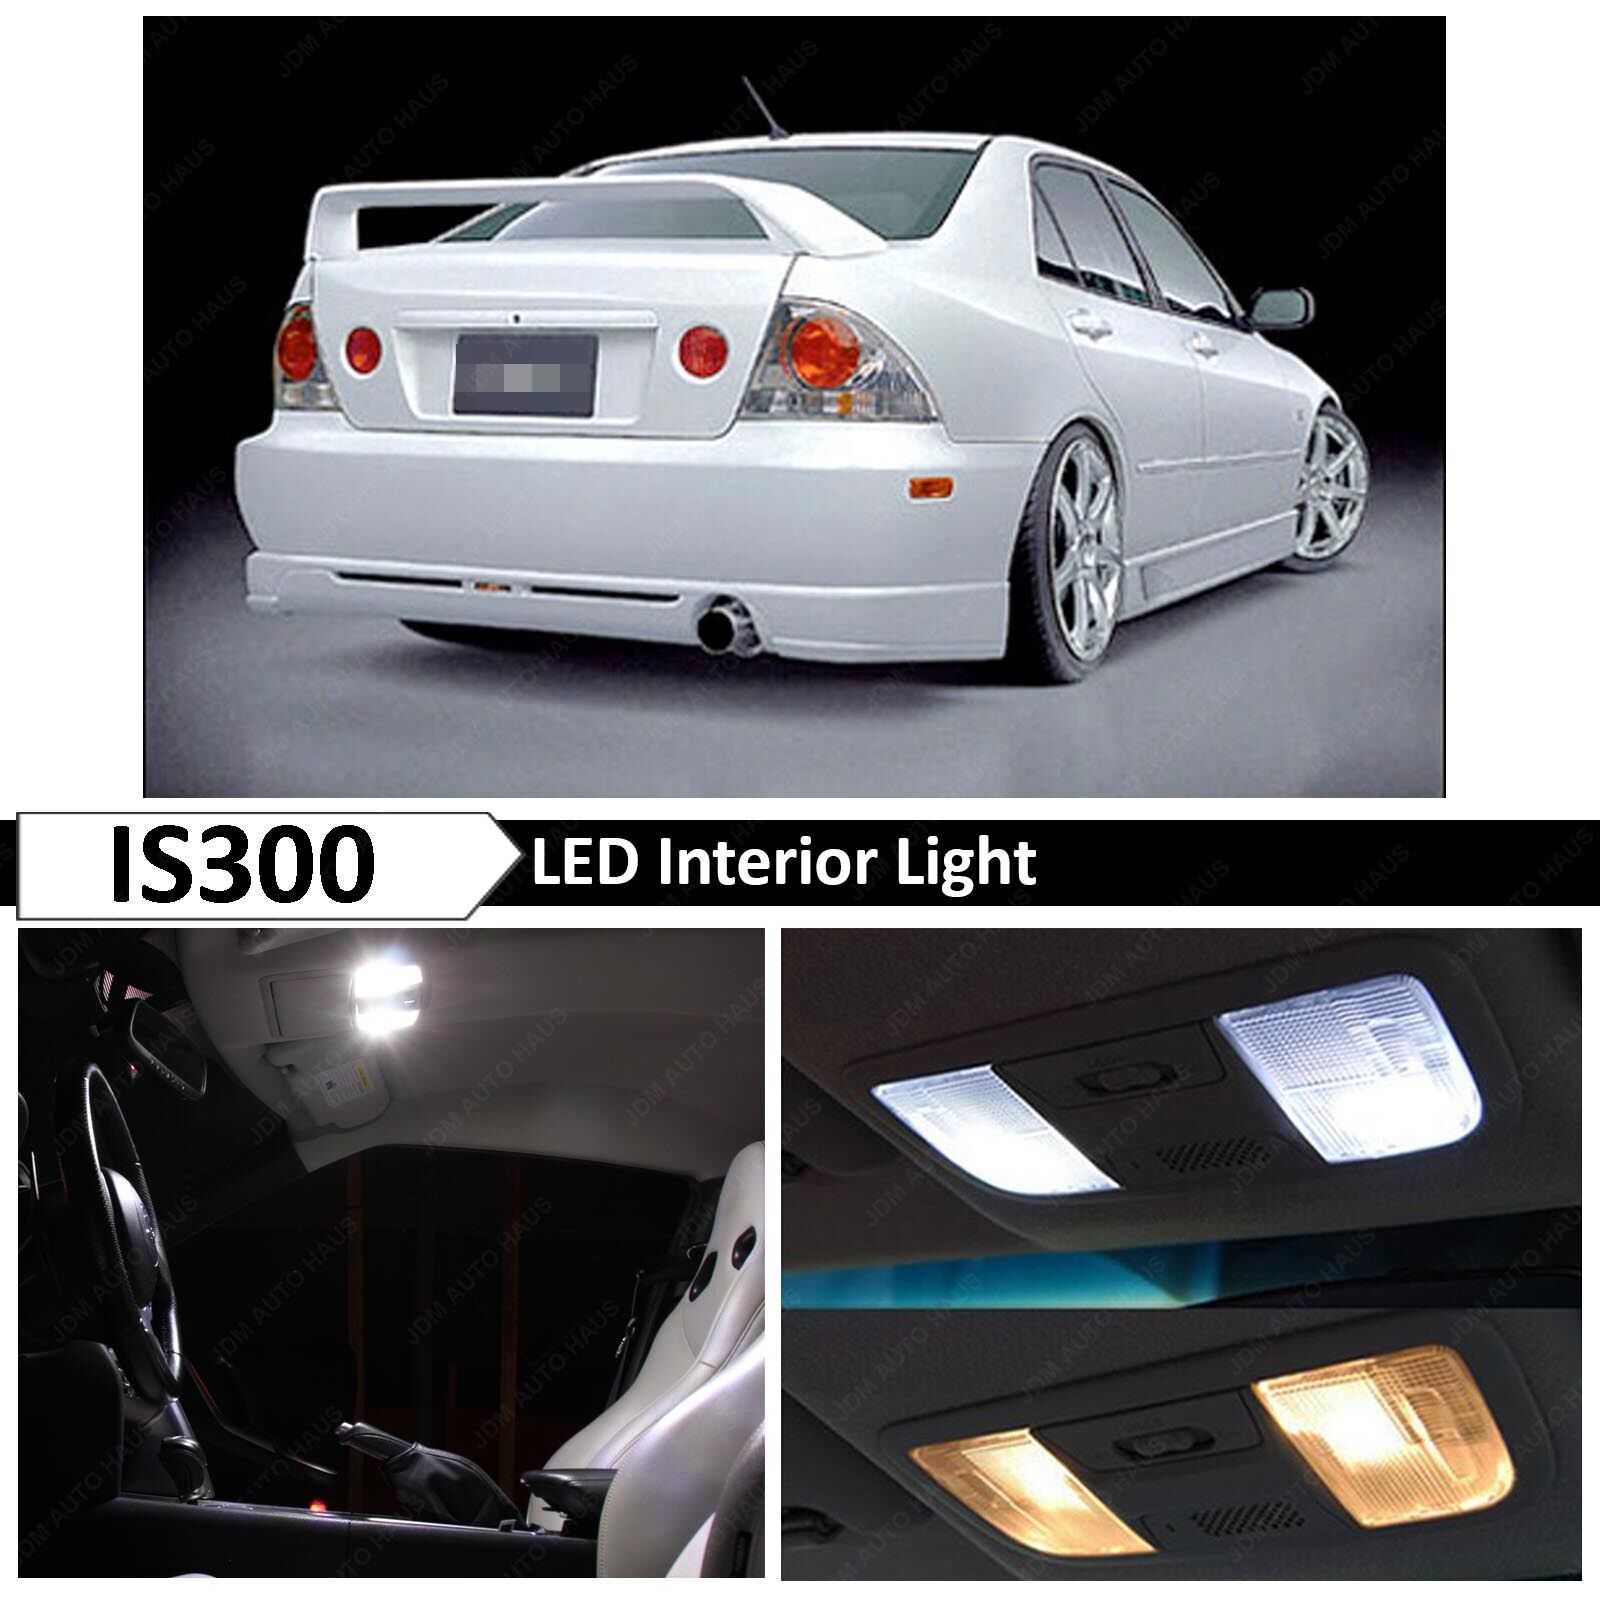 12x White Interior Map LED Lights Bulb Package Kit Fits Lexus IS300 2001-2005